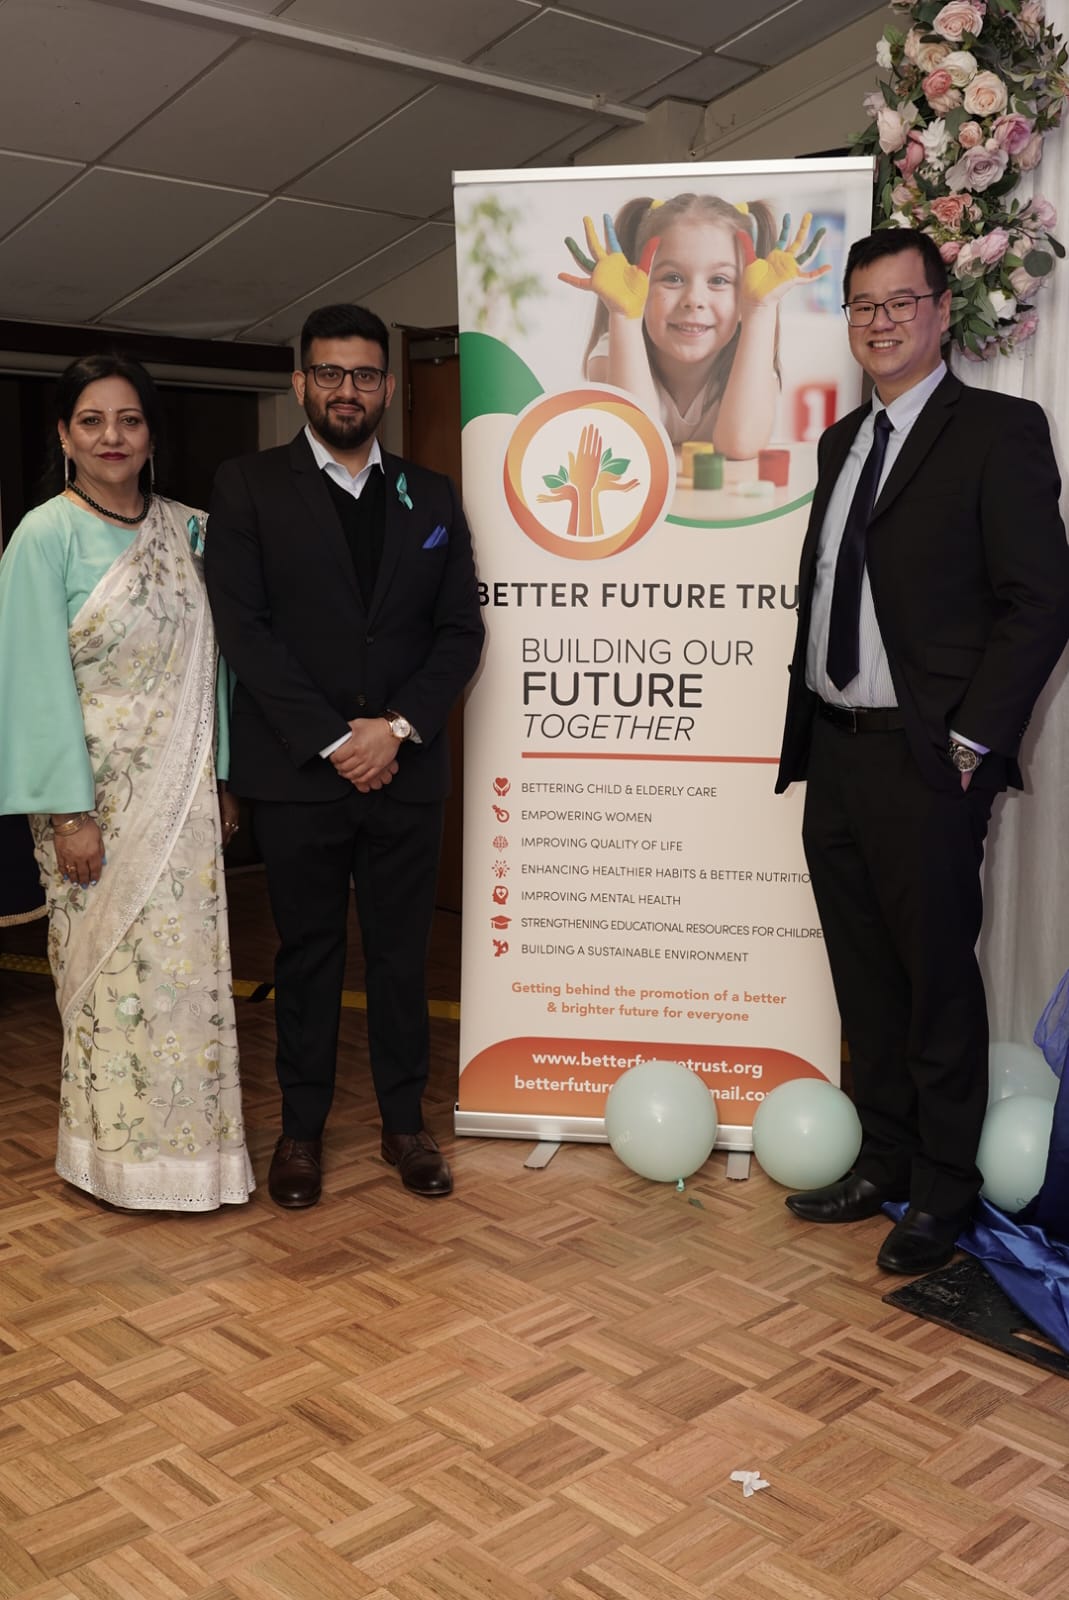 Community Unites for Ovarian Cancer Awareness at Successful Better Future Trust Event